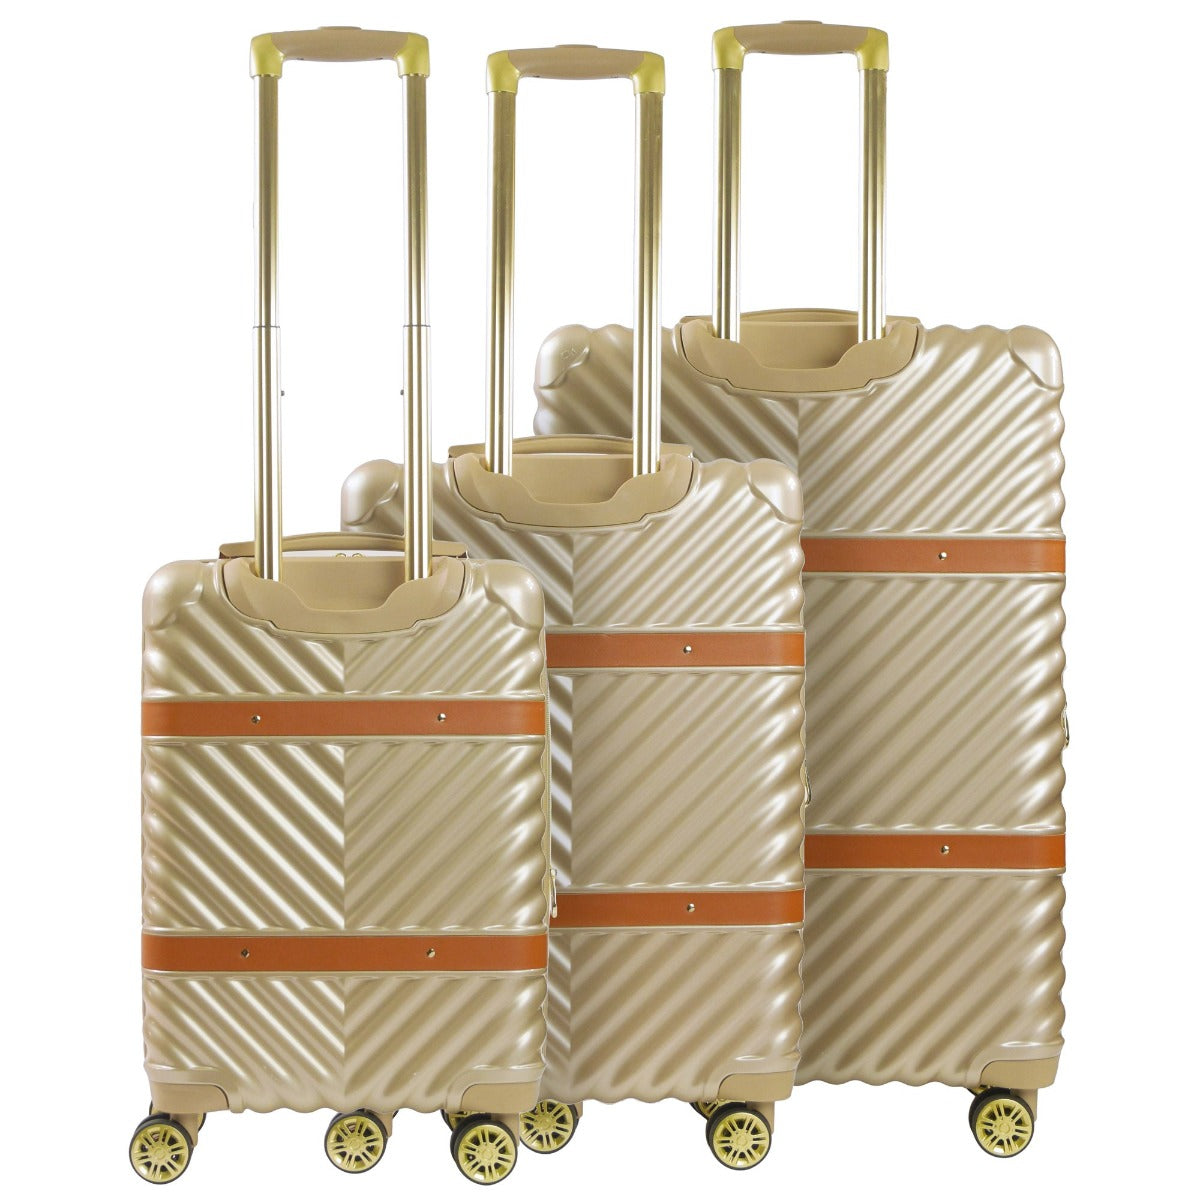 Christian Siriano New York Stella hardside spinner 3 piece suitcase set taupe - best durable luggage sets for families